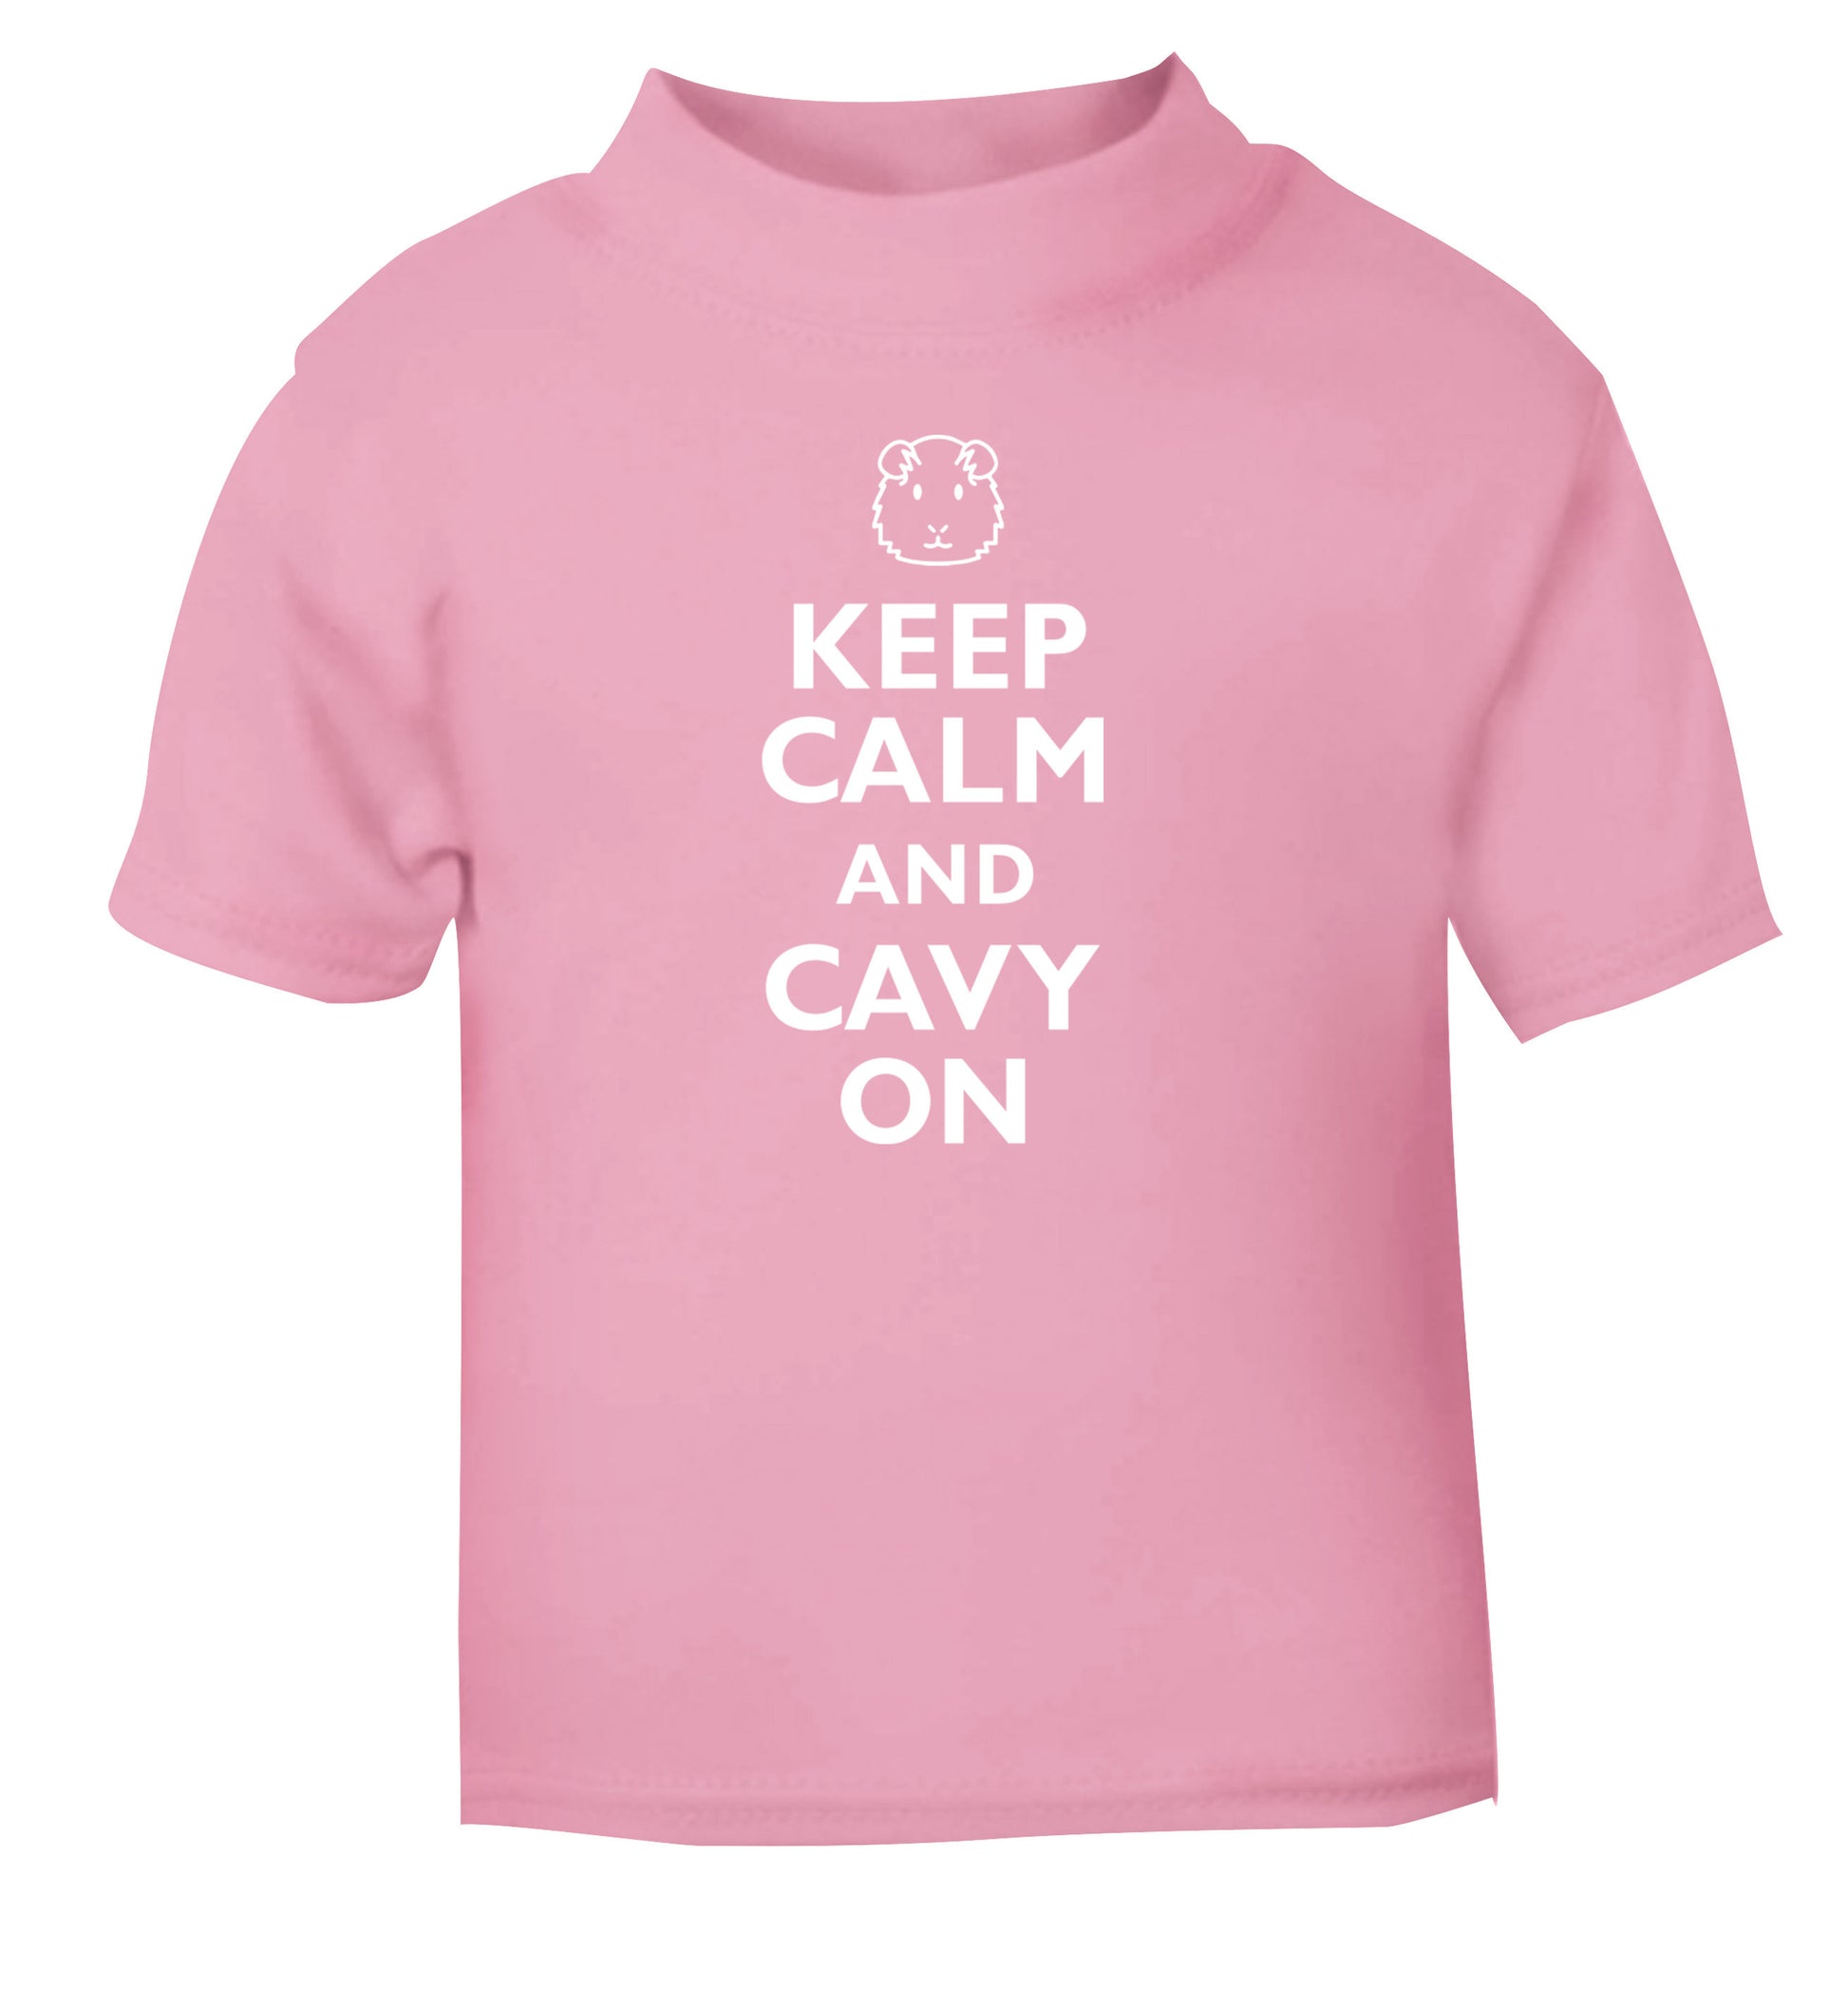 Keep calm and cavvy on light pink Baby Toddler Tshirt 2 Years